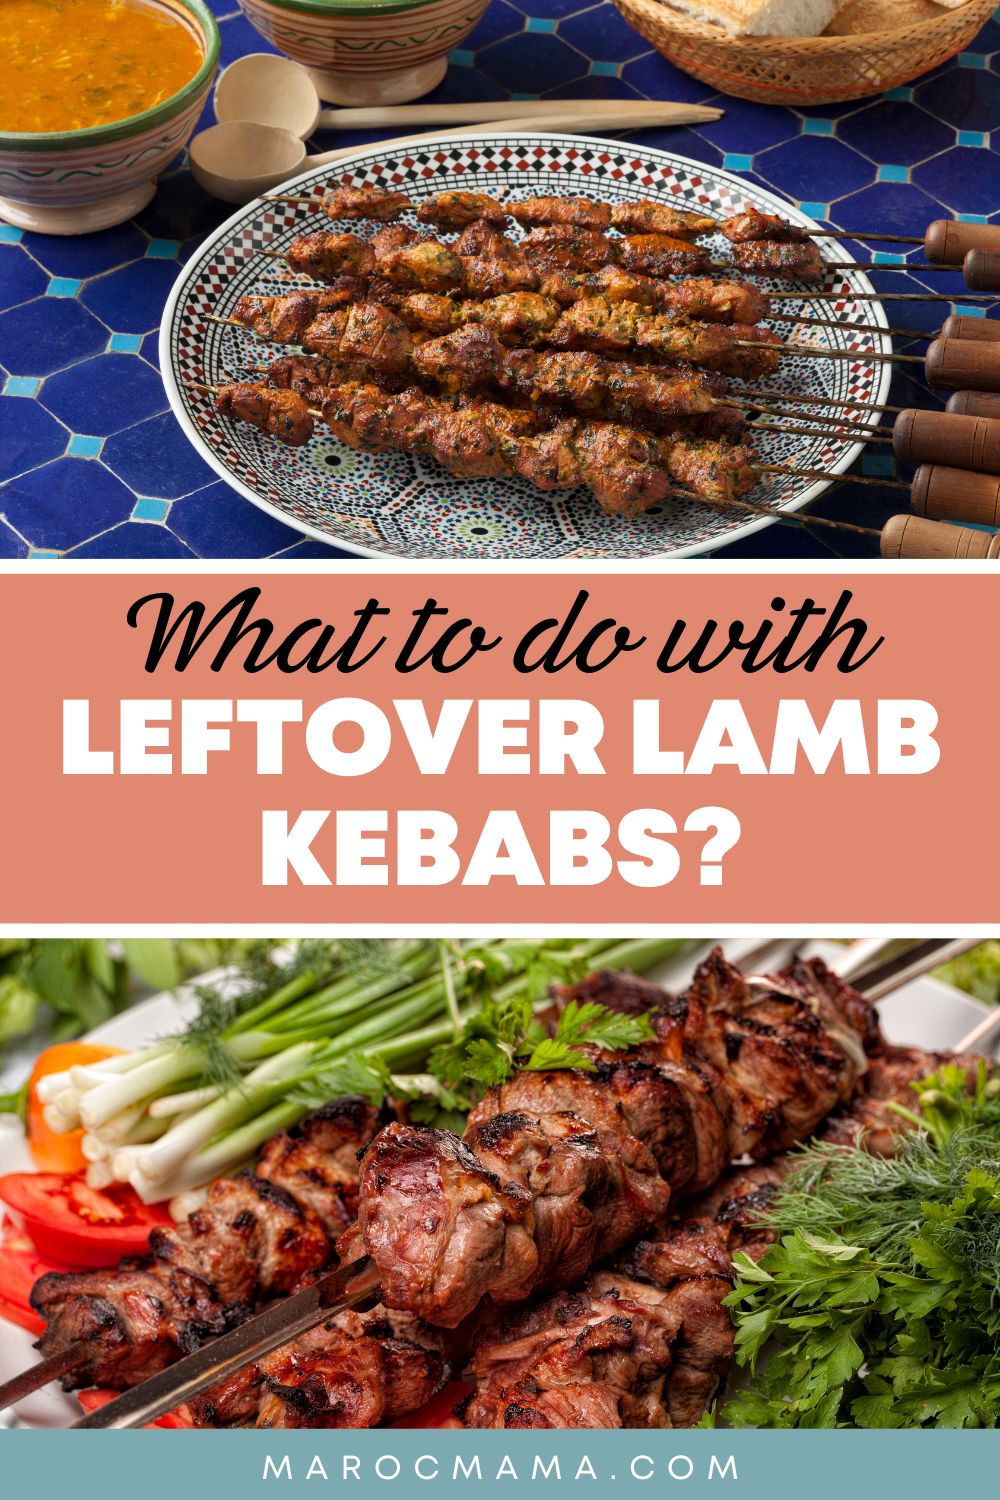 What to Do with Leftover Lamb Kebabs?